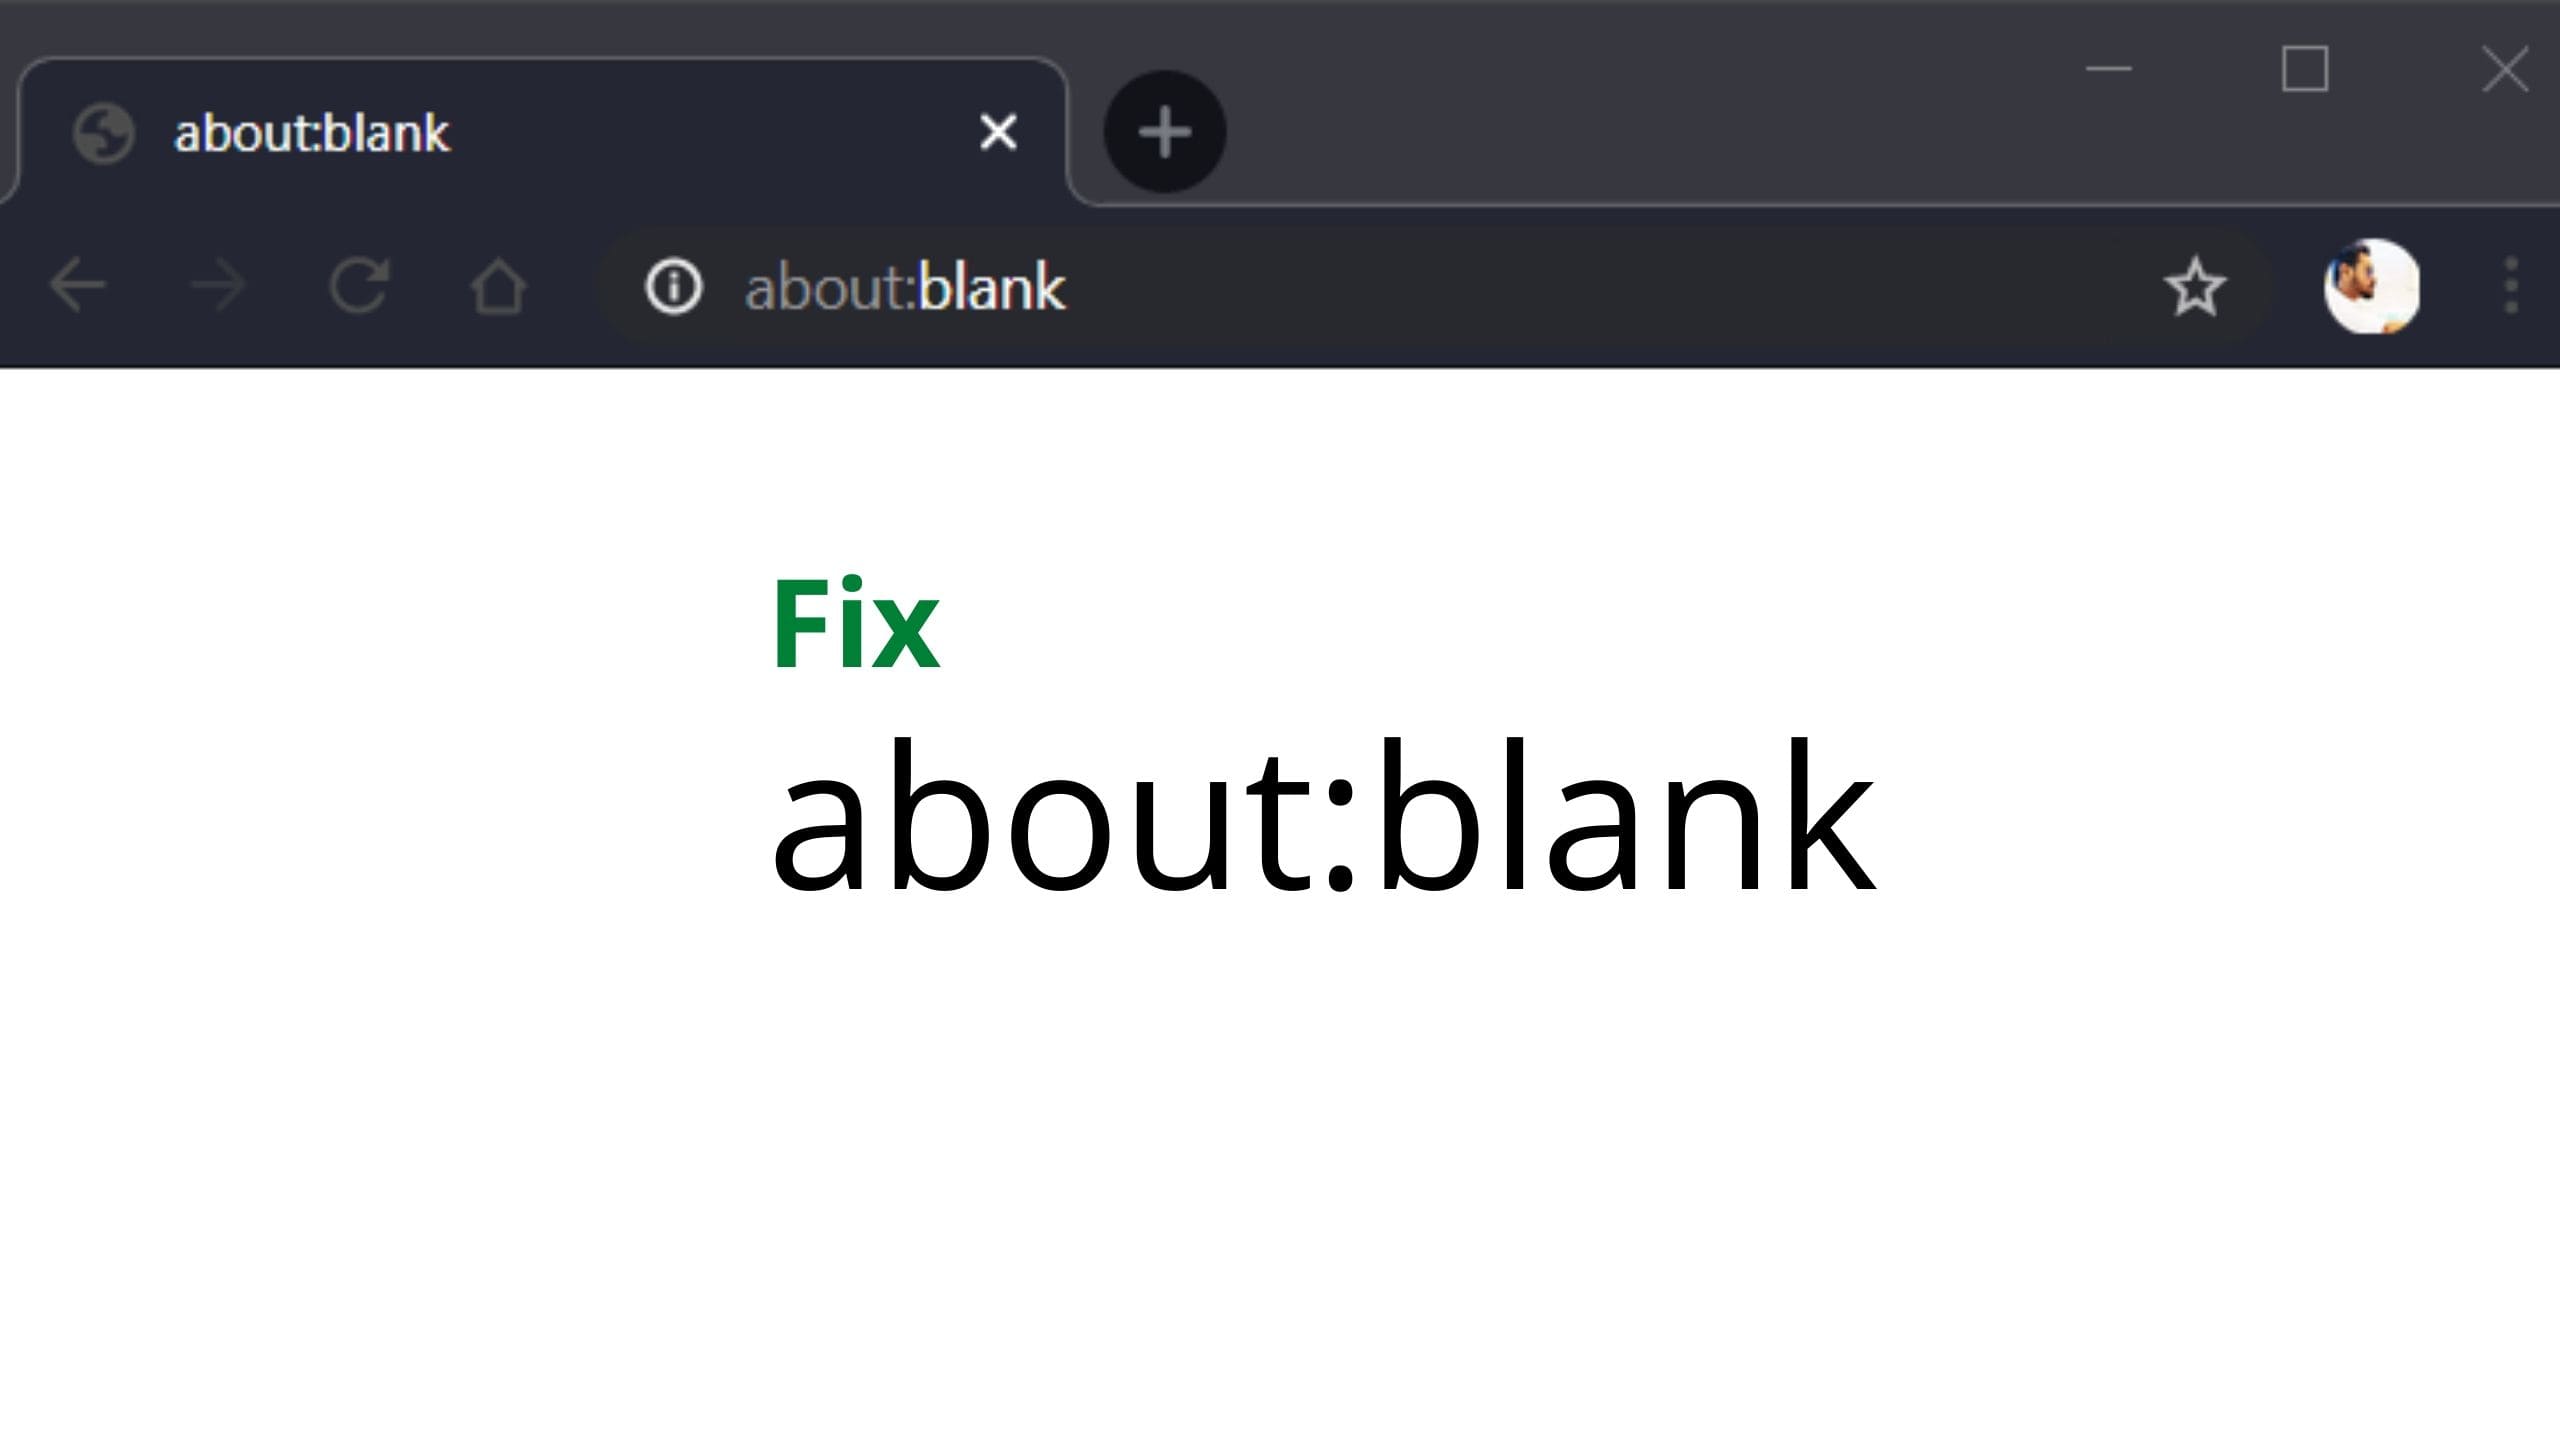 Blank meaning. About:blank. About:blank ютуб. About.blank фото.